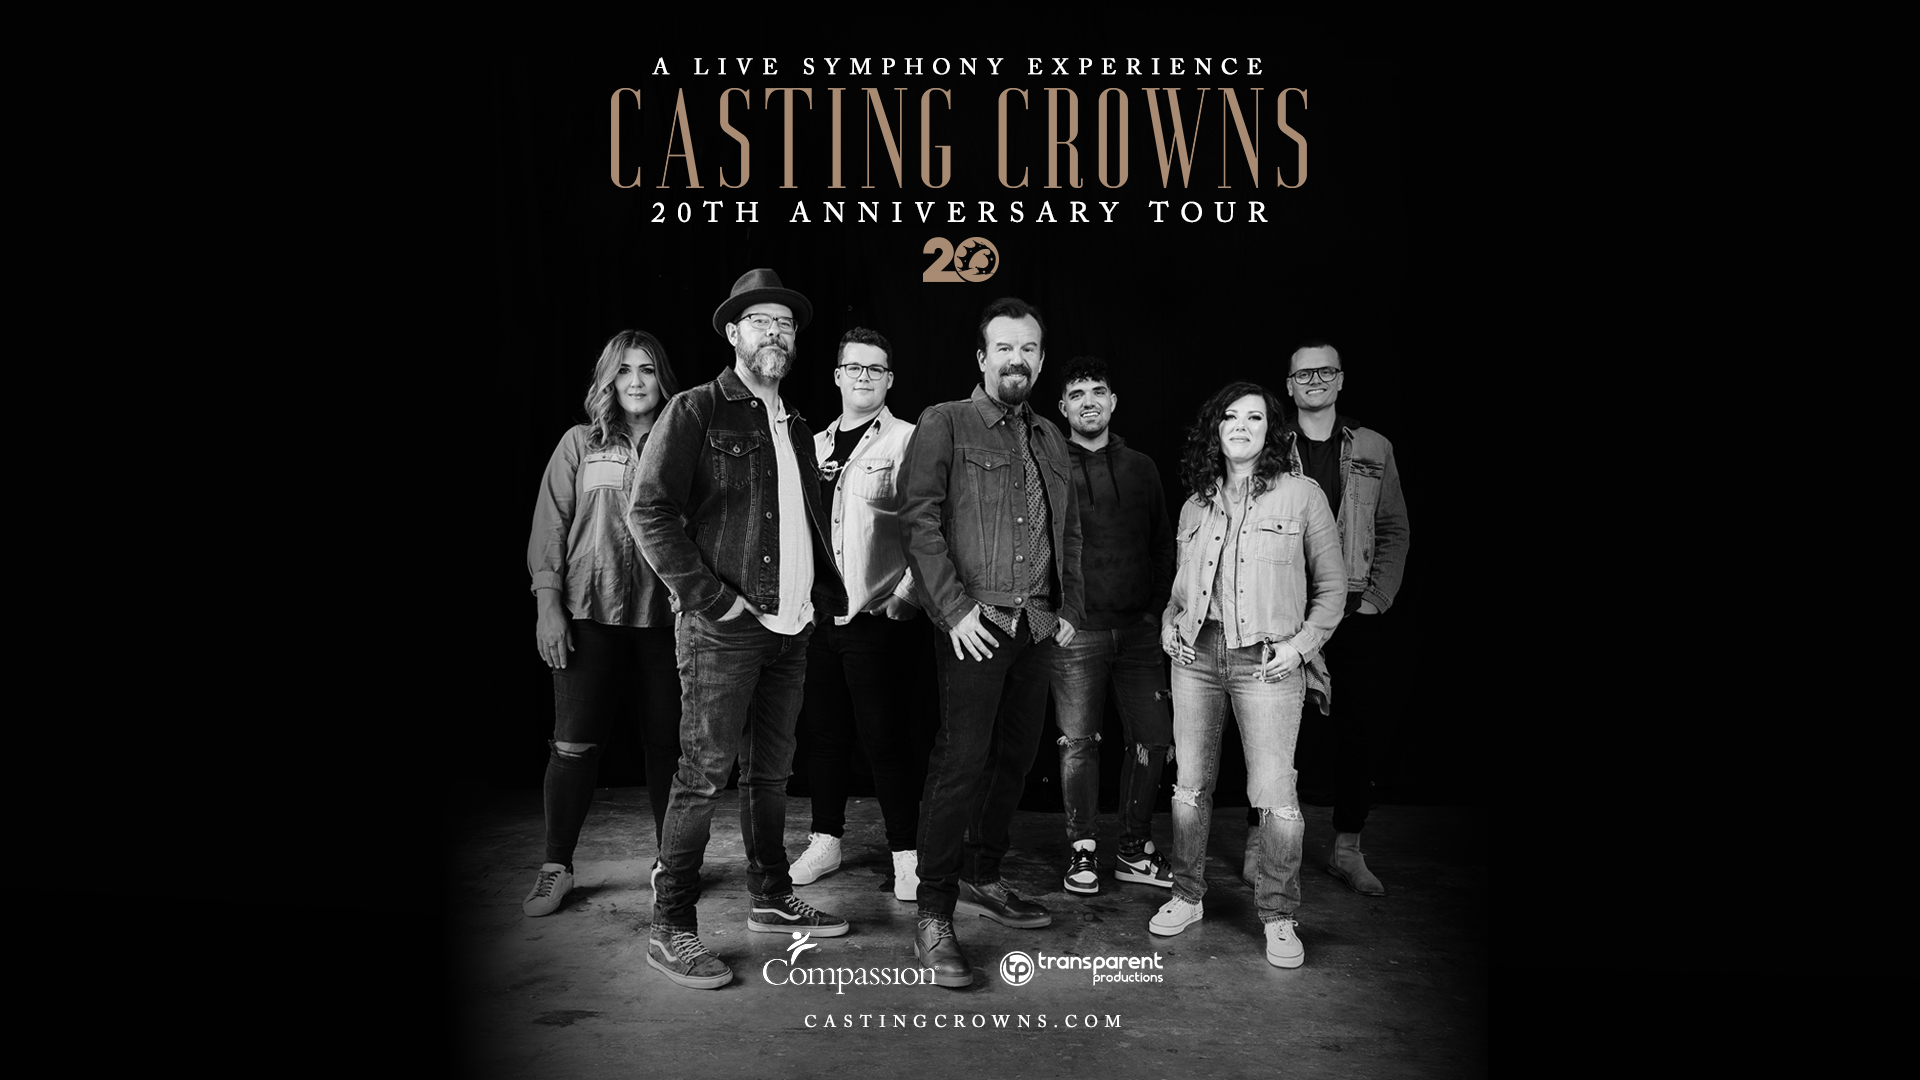 The Casting Crowns 20th Anniversary Tour San Diego, CA October 28